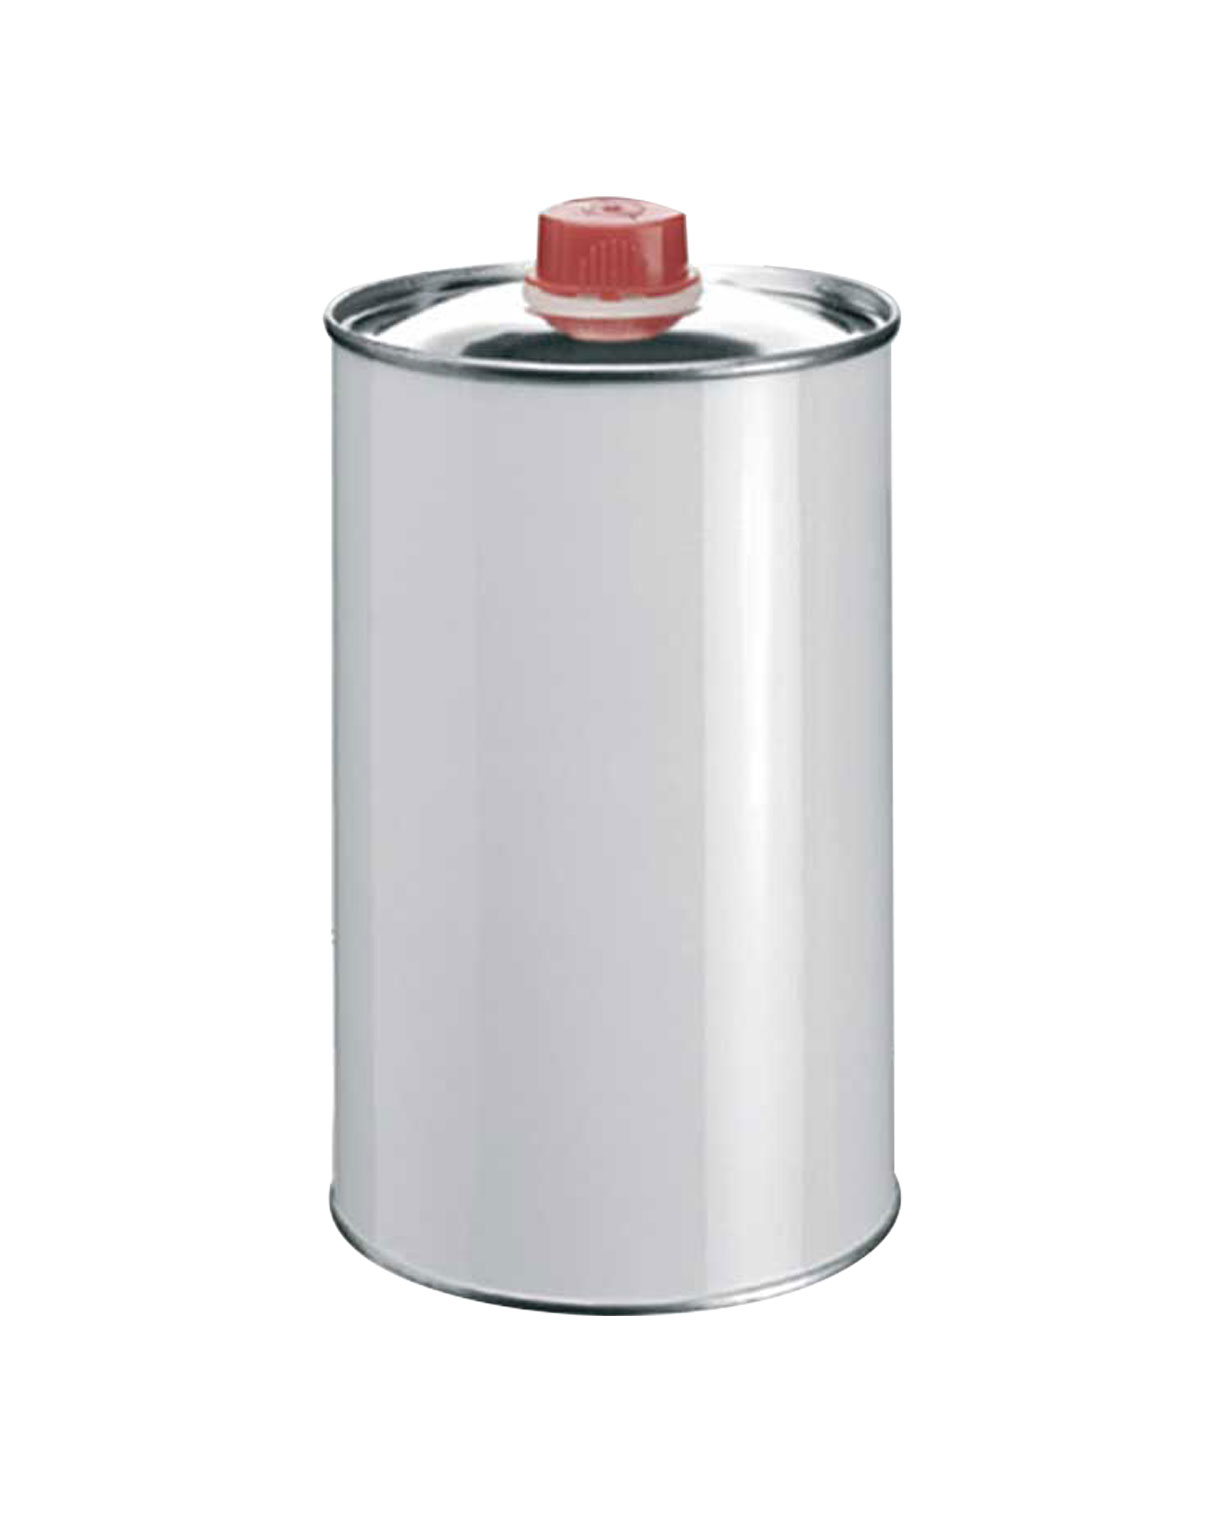 Silver Tinplate Cylindrical Can with Red Cap